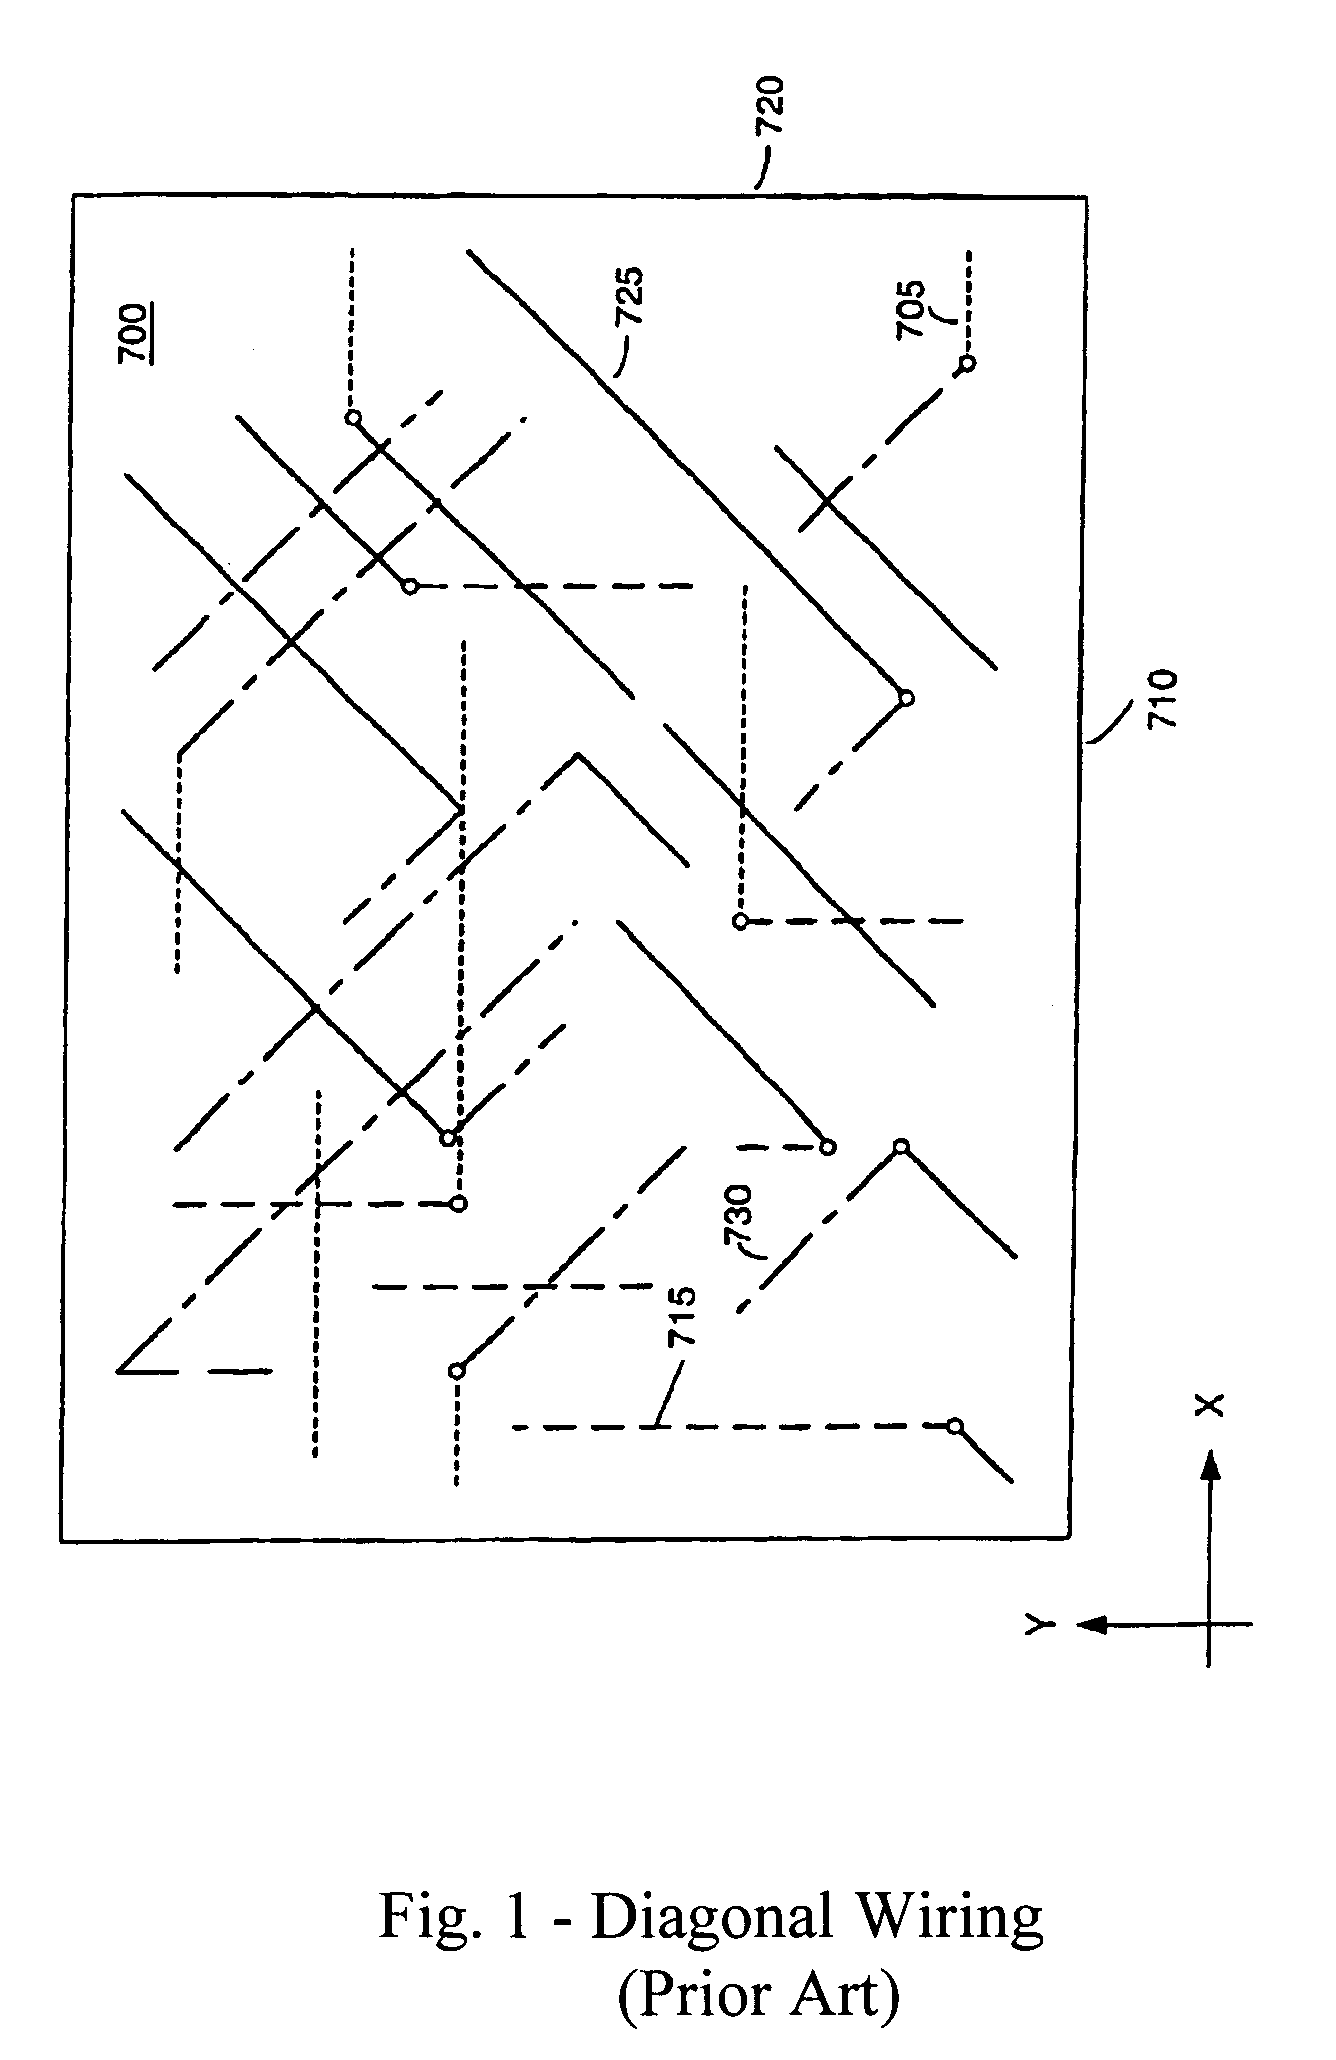 Method and system for implementing an analytical wirelength formulation for unavailability of routing directions